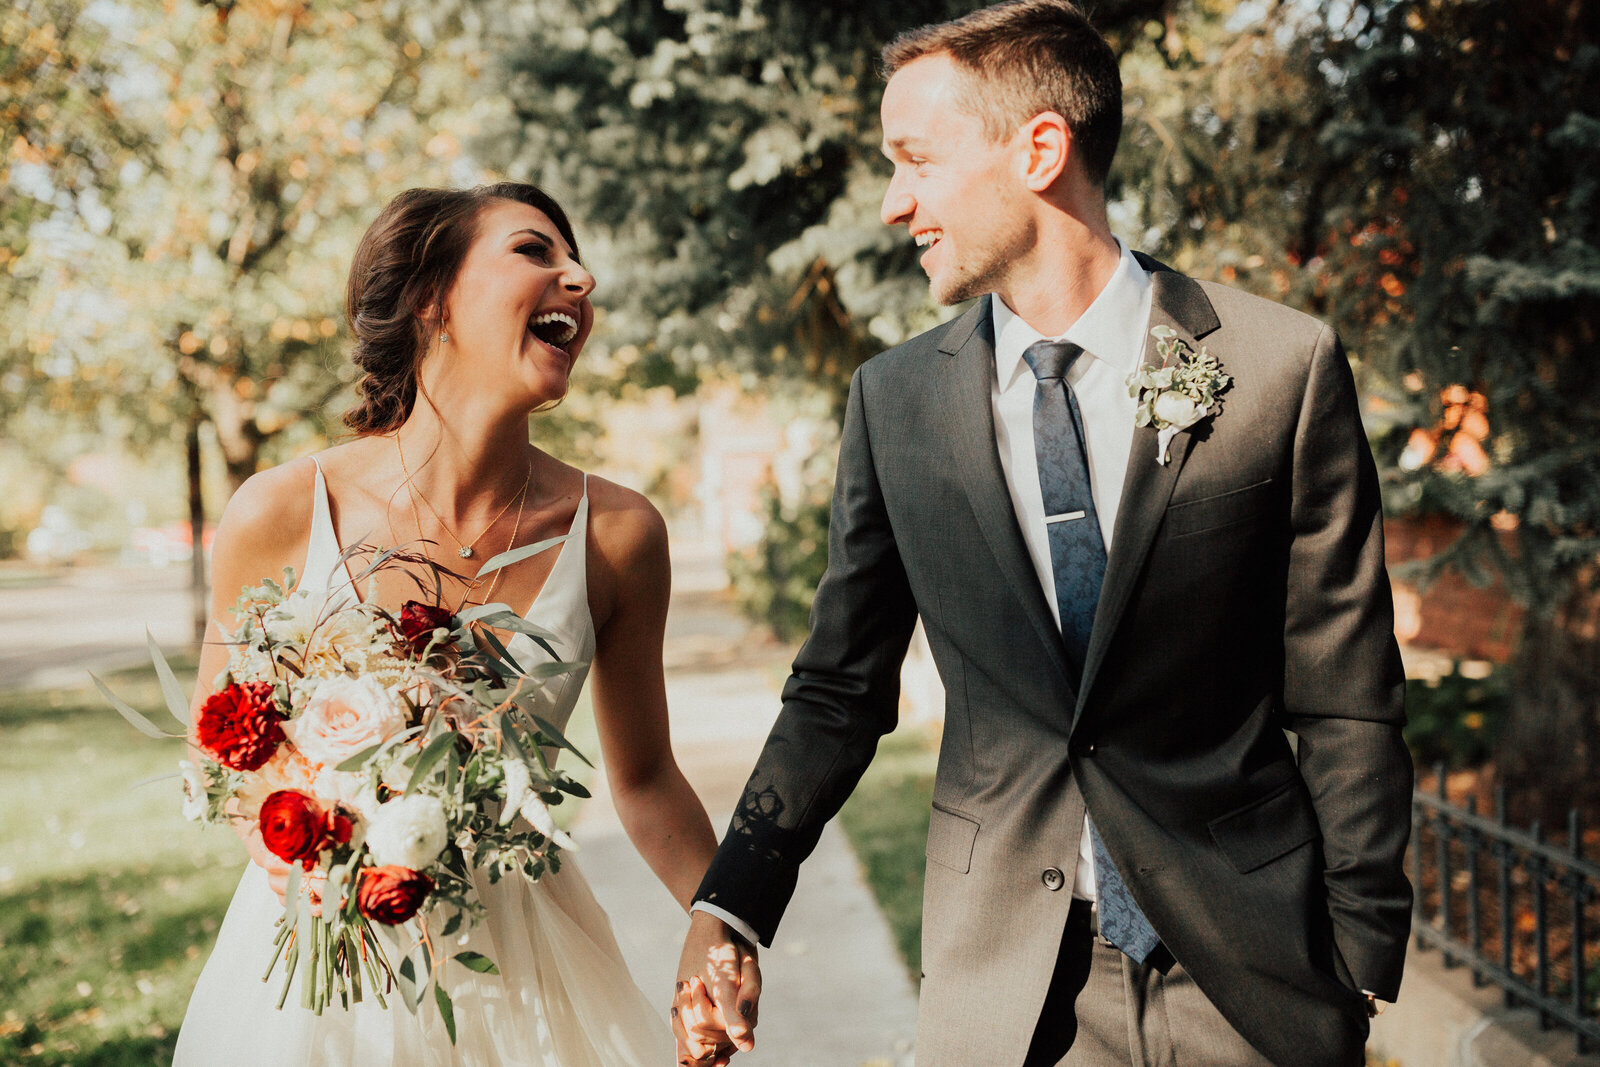 Outdoor summer wedding at the St Vrain wedding venue, in Longmont CO.